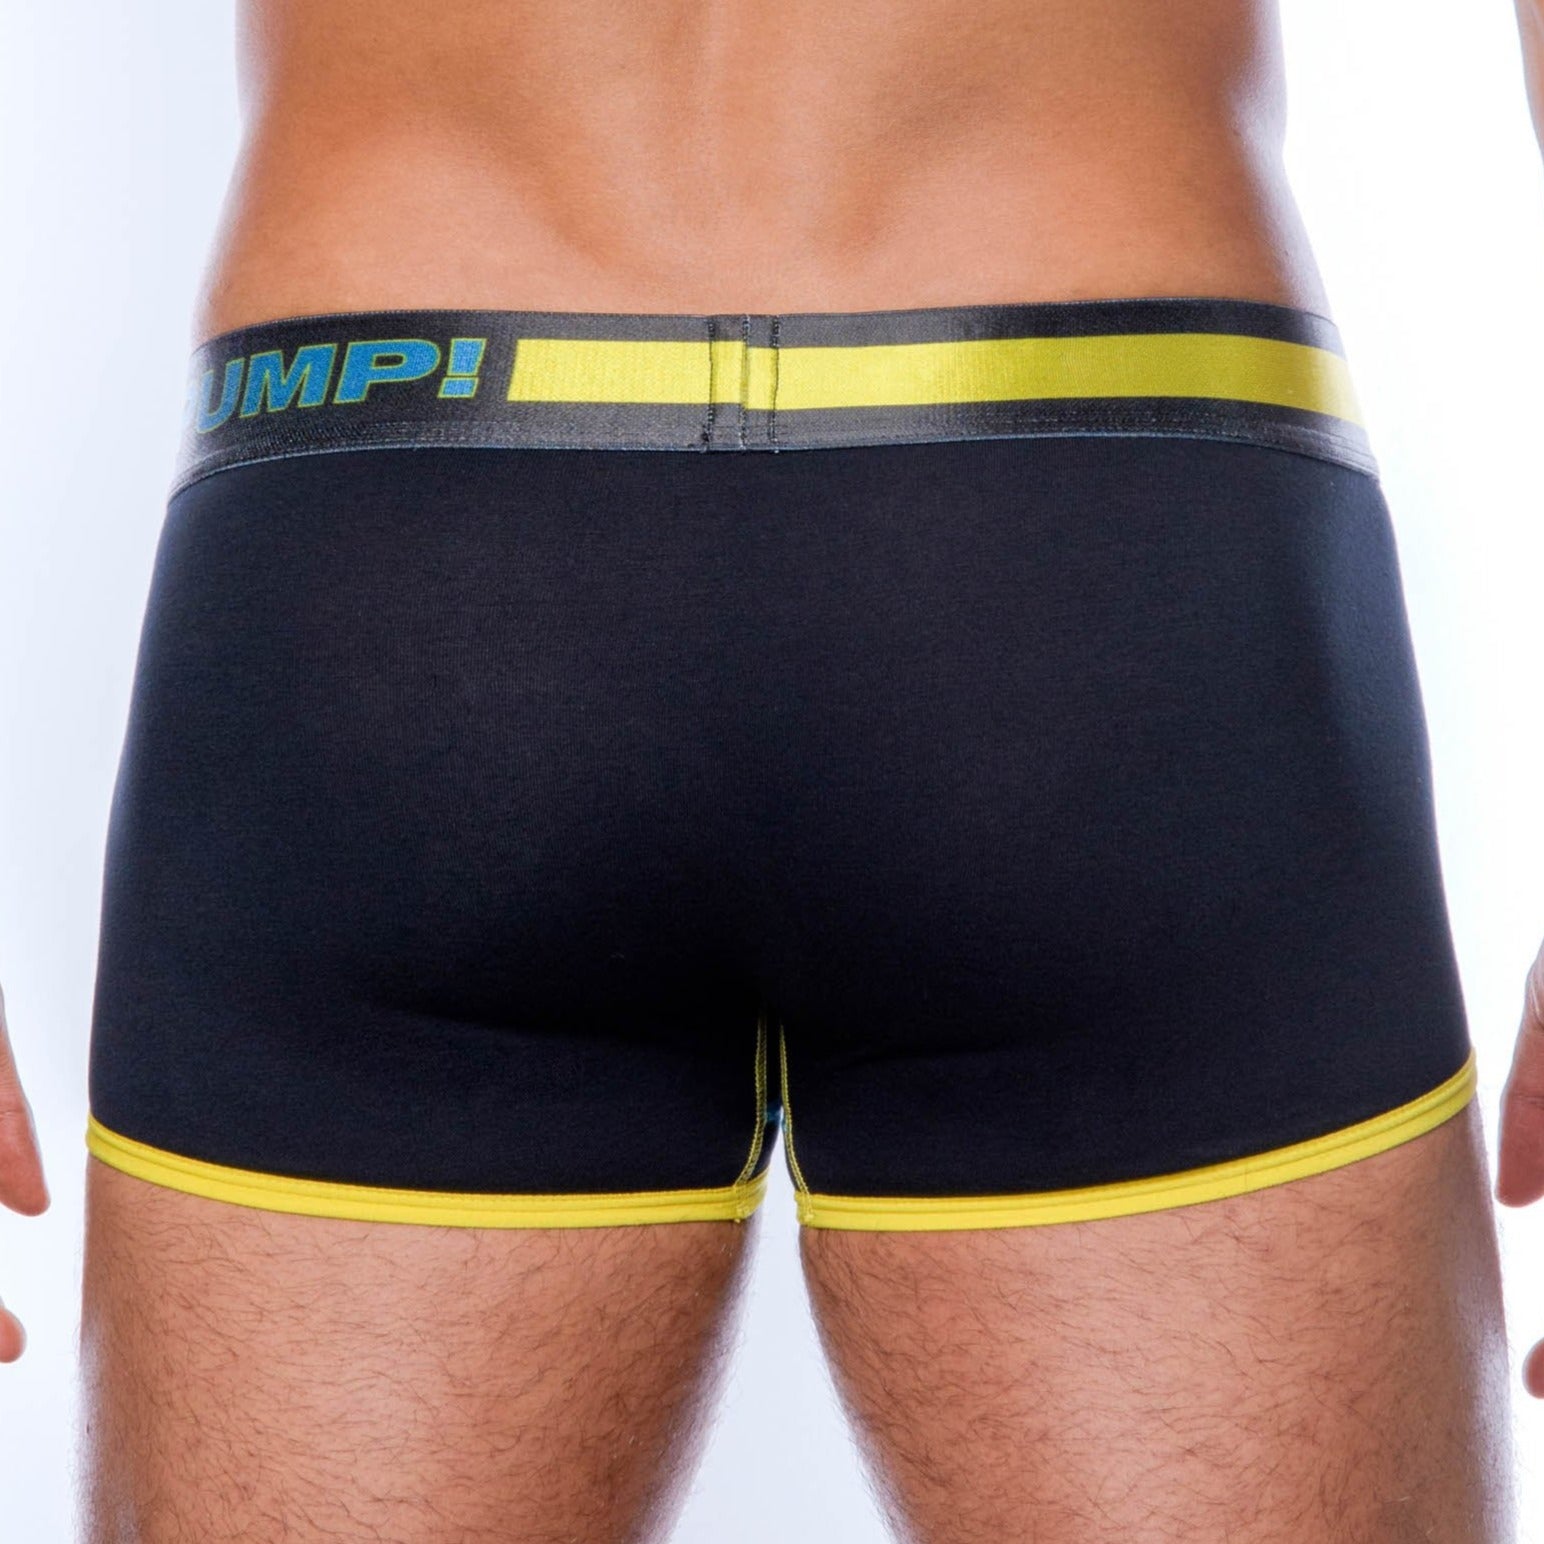 Play Boxer - Yellow Back by PUMP! Underwear at Trenderwear.com